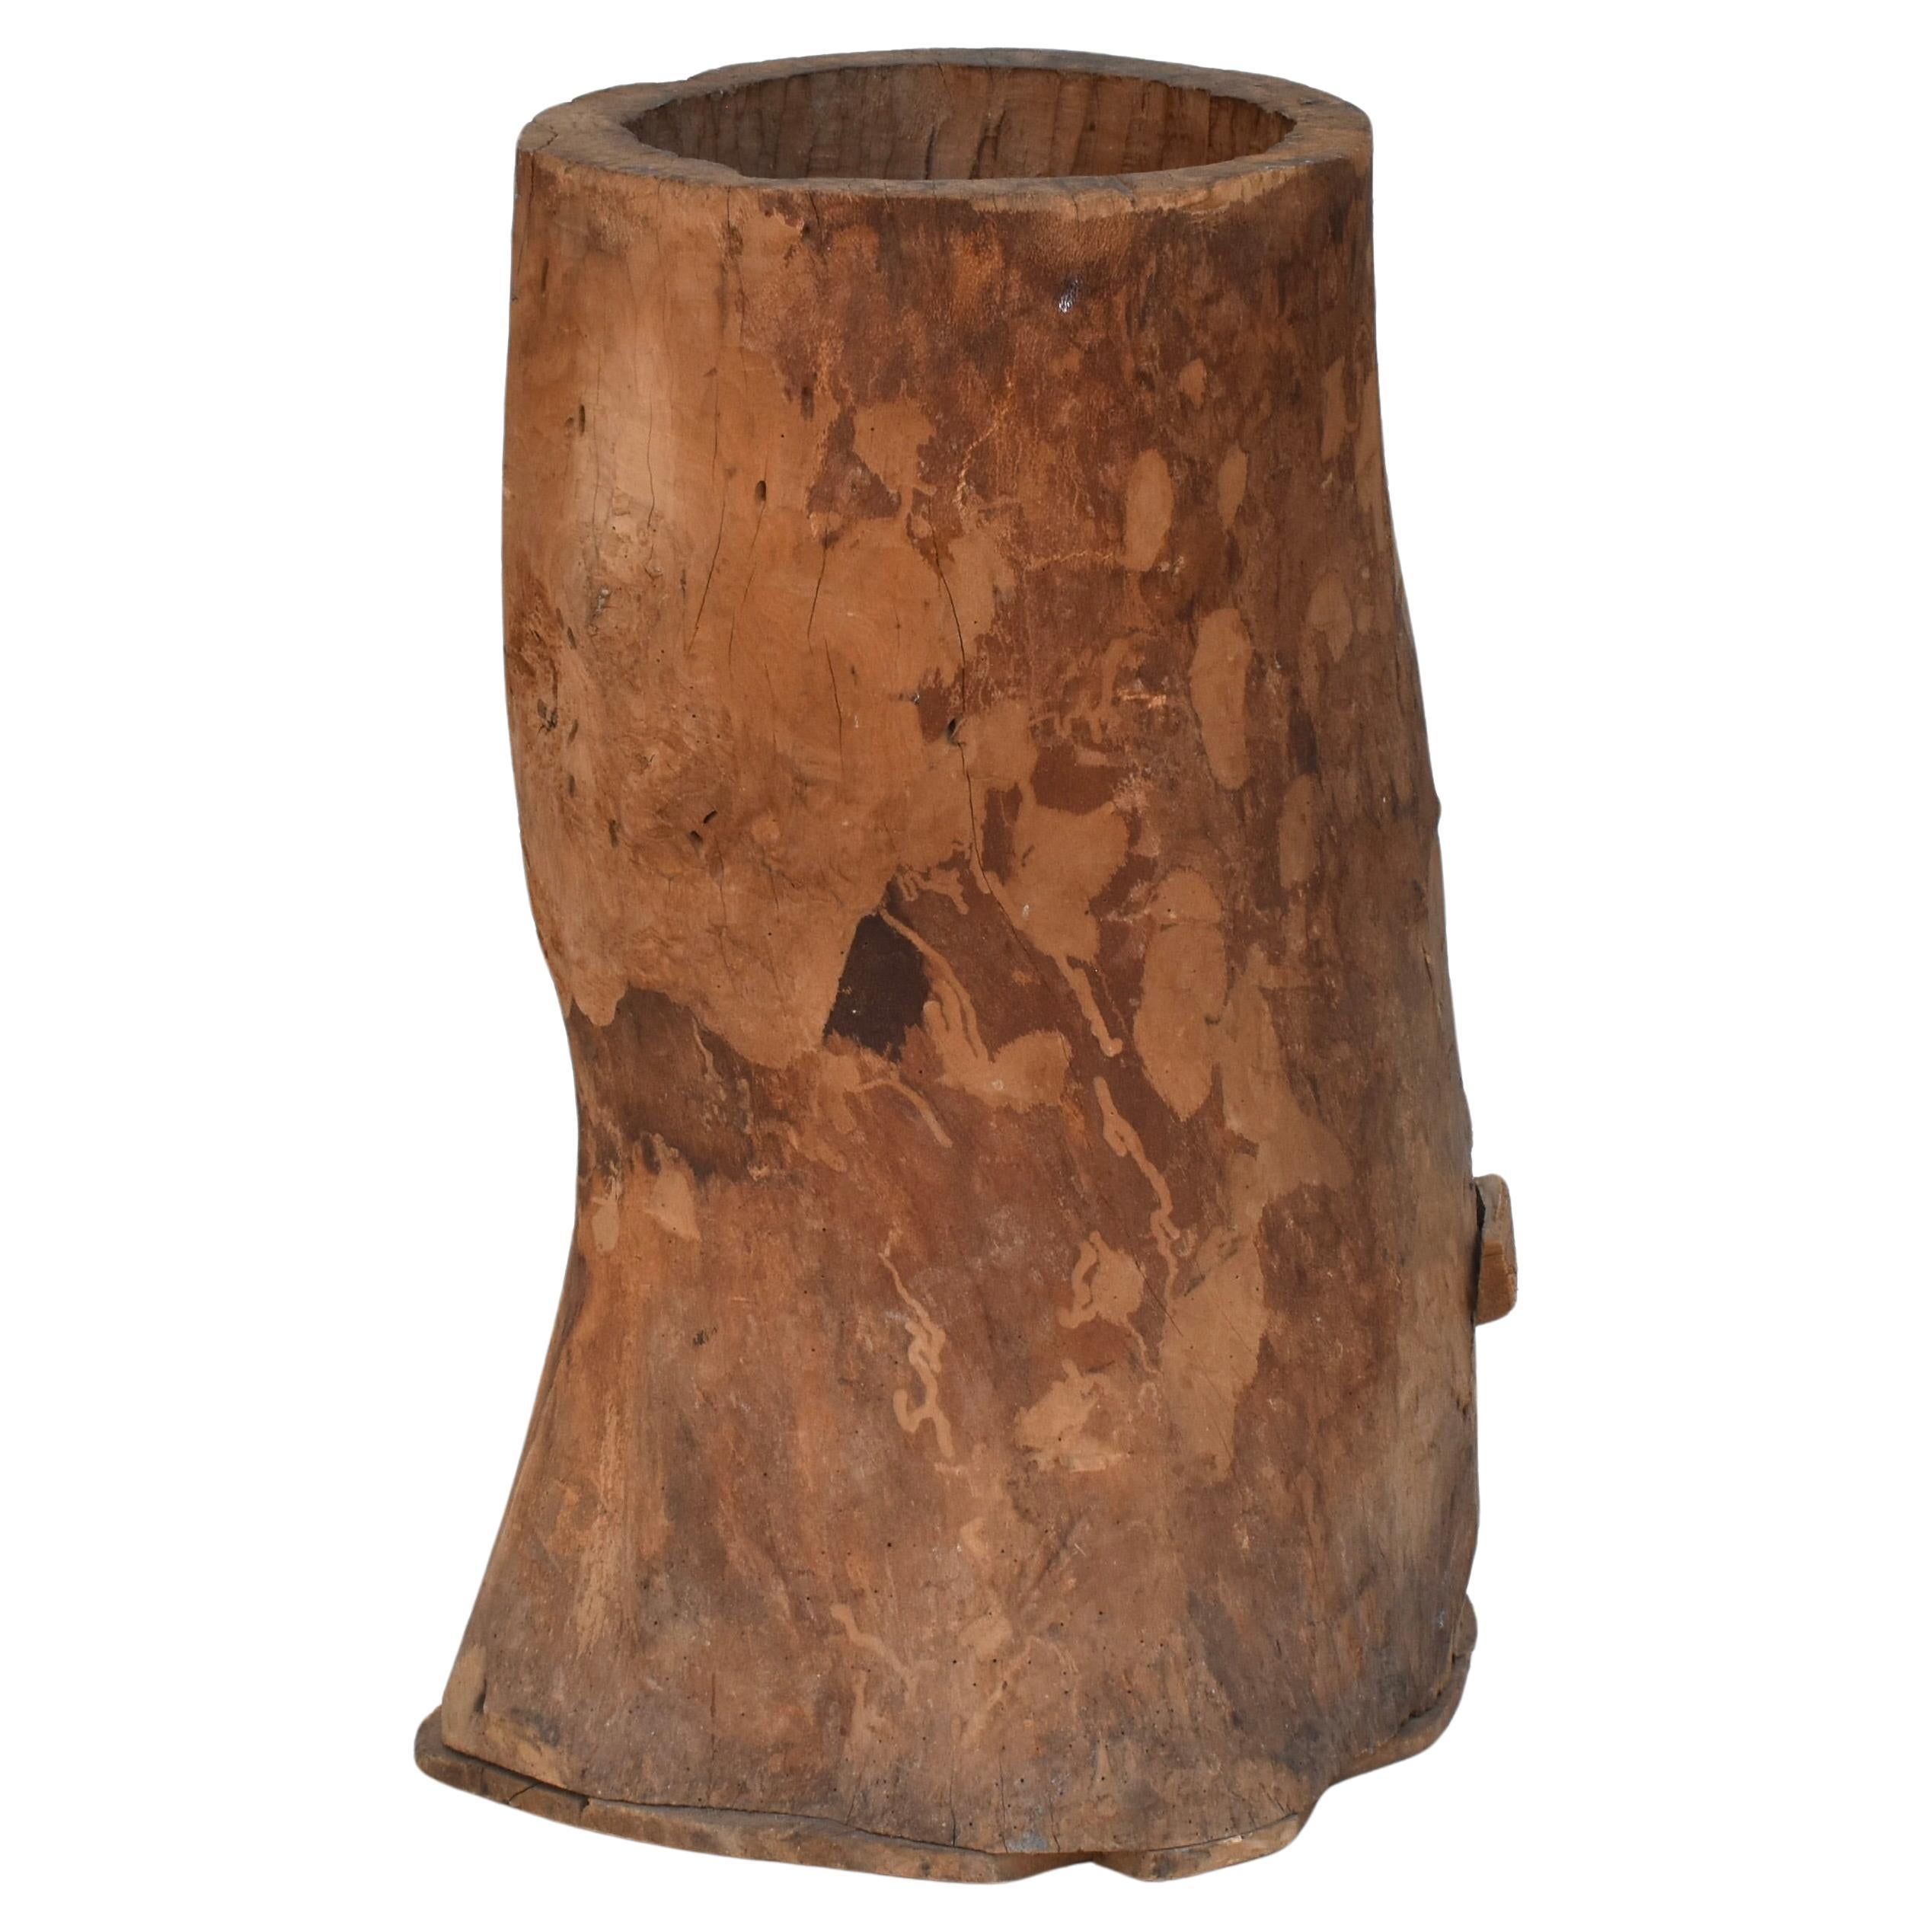 French Antique Hollowed Tree Trunk Wooden Planter Vessel, Late 19th C. France For Sale 1